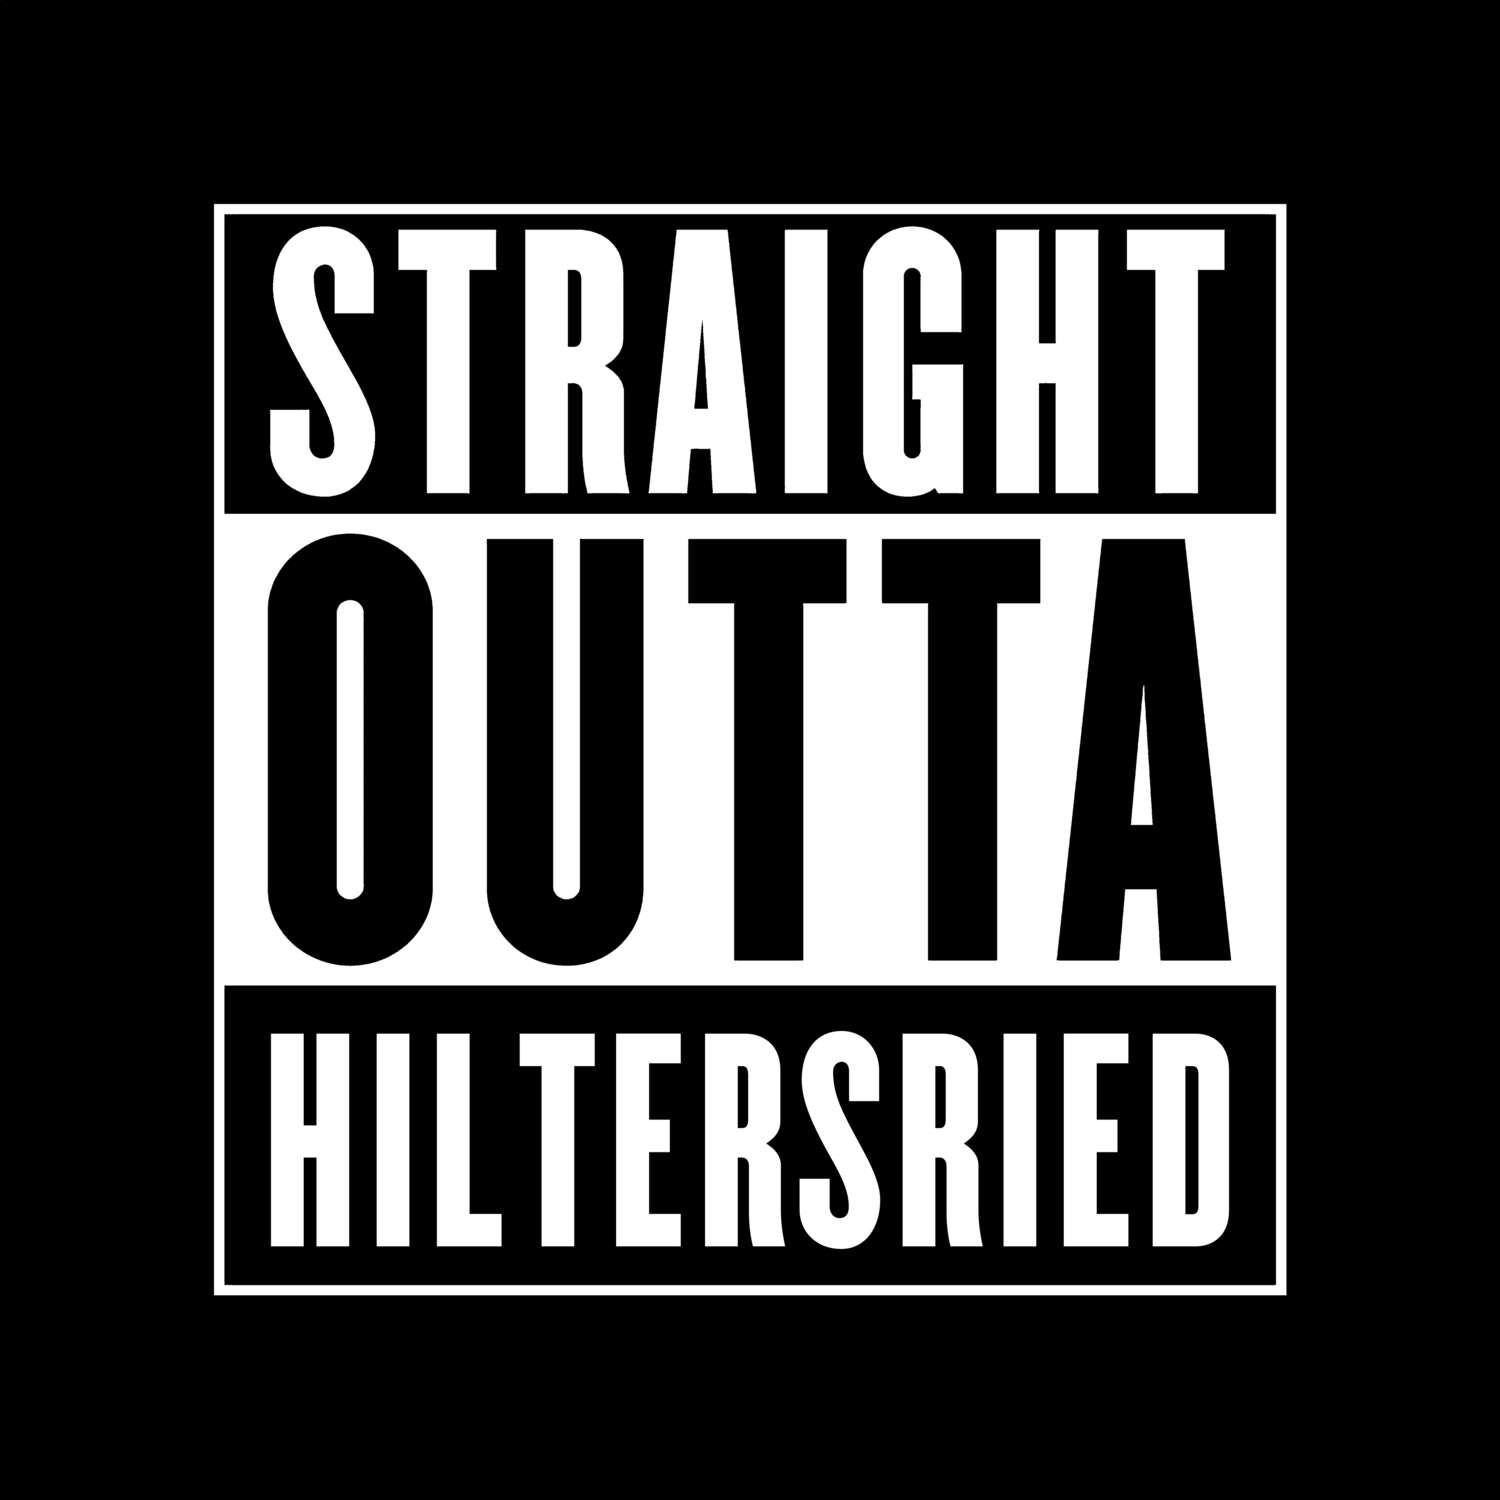 Hiltersried T-Shirt »Straight Outta«